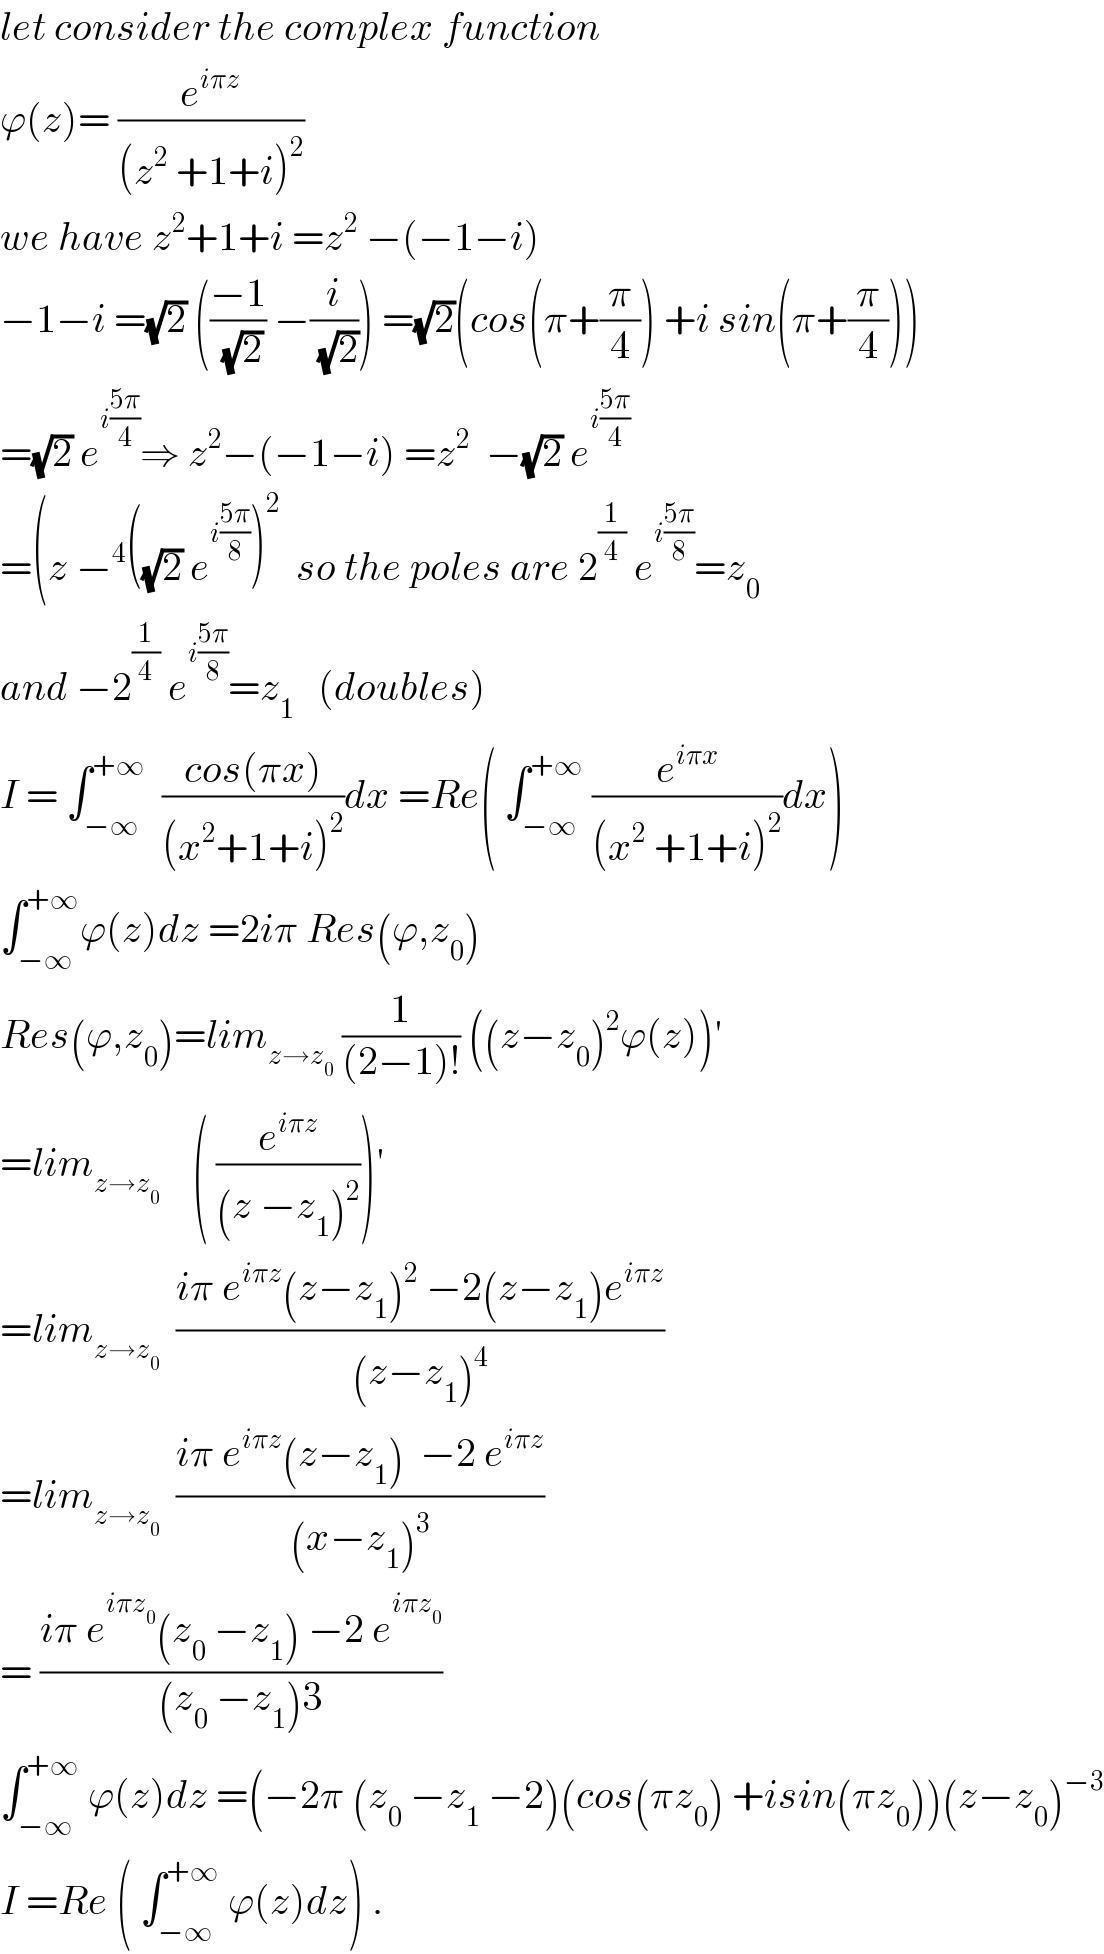 let consider the complex function  ϕ(z)= (e^(iπz) /((z^2  +1+i)^2 ))  we have z^2 +1+i =z^2  −(−1−i)  −1−i =(√2) (((−1)/(√2)) −(i/(√2))) =(√2)(cos(π+(π/4)) +i sin(π+(π/4)))  =(√2) e^(i((5π)/4)) ⇒ z^2 −(−1−i) =z^2   −(√2) e^(i((5π)/4))   =(z −^4 ((√2) e^(i((5π)/8)) )^2   so the poles are 2^(1/4)  e^(i((5π)/8)) =z_0   and −2^(1/4)  e^(i((5π)/8)) =z_1    (doubles)  I = ∫_(−∞) ^(+∞)   ((cos(πx))/((x^2 +1+i)^2 ))dx =Re( ∫_(−∞) ^(+∞)  (e^(iπx) /((x^2  +1+i)^2 ))dx)  ∫_(−∞) ^(+∞) ϕ(z)dz =2iπ Res(ϕ,z_0 )  Res(ϕ,z_0 )=lim_(z→z_0 )  (1/((2−1)!)) ((z−z_0 )^2 ϕ(z))^′   =lim_(z→z_0   )    ( (e^(iπz) /((z −z_1 )^2 )))^′   =lim_(z→z_0 )   ((iπ e^(iπz) (z−z_1 )^2  −2(z−z_1 )e^(iπz) )/((z−z_1 )^4 ))  =lim_(z→z_0 )   ((iπ e^(iπz) (z−z_1 )  −2 e^(iπz) )/((x−z_1 )^3 ))  = ((iπ e^(iπz_0 ) (z_0  −z_1 ) −2 e^(iπz_0 ) )/((z_0  −z_1 )3))  ∫_(−∞) ^(+∞)  ϕ(z)dz =(−2π (z_0  −z_1  −2)(cos(πz_0 ) +isin(πz_0 ))(z−z_0 )^(−3)   I =Re ( ∫_(−∞) ^(+∞)  ϕ(z)dz) .  